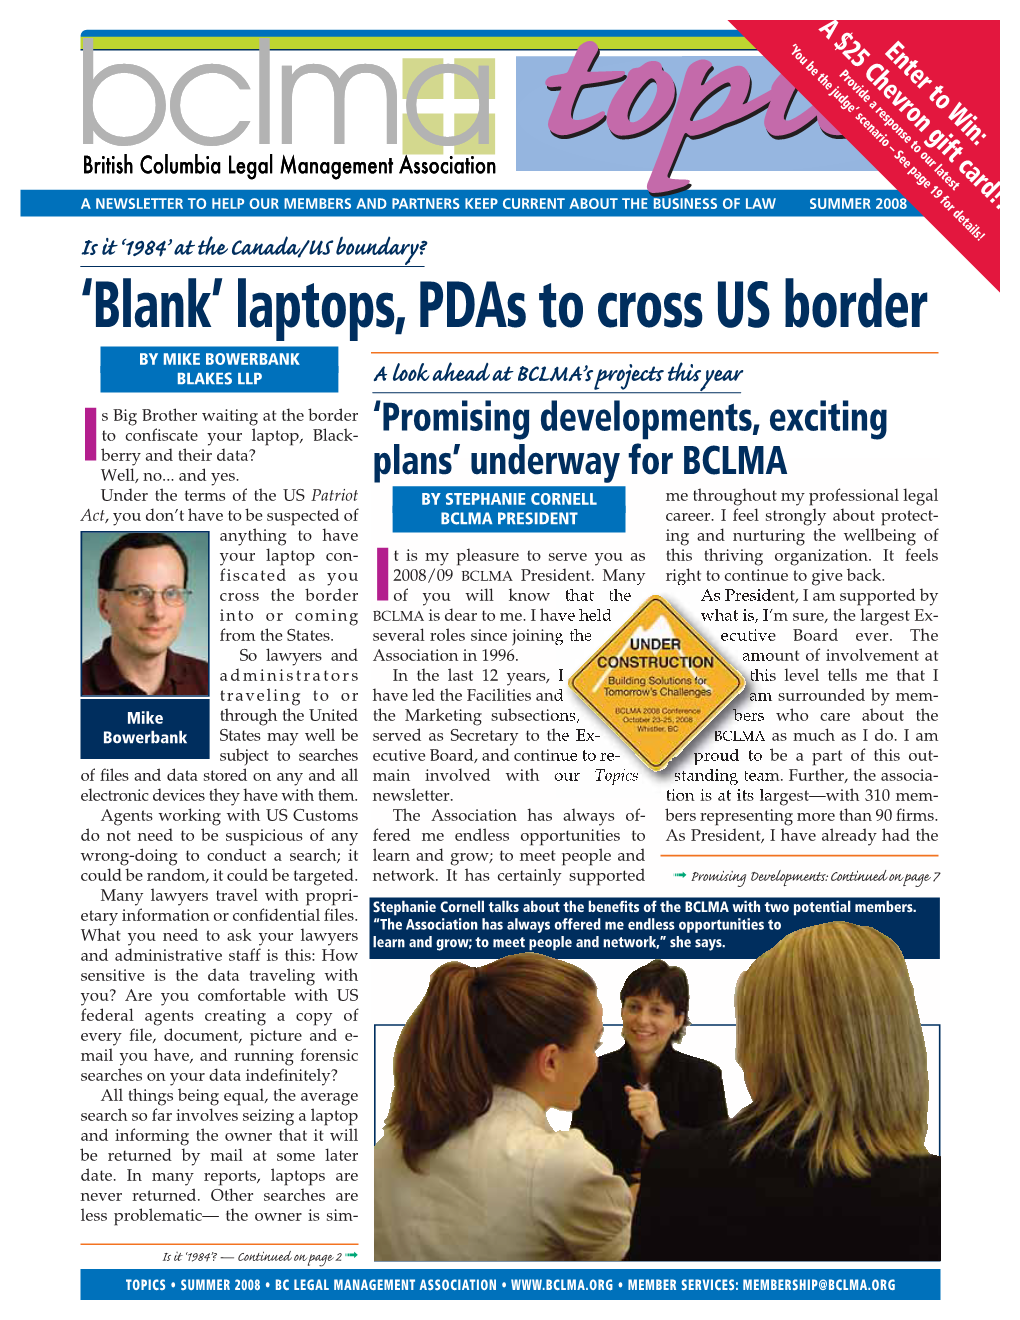 SUMMER 2008 Is It ‘1984’ at the Canada/US Boundary? ‘Blank’ Laptops, Pdas to Cross US Border by MIKE BOWERBANK BLAKES LLP a Look Ahead at BCLMA’S Projects This Year